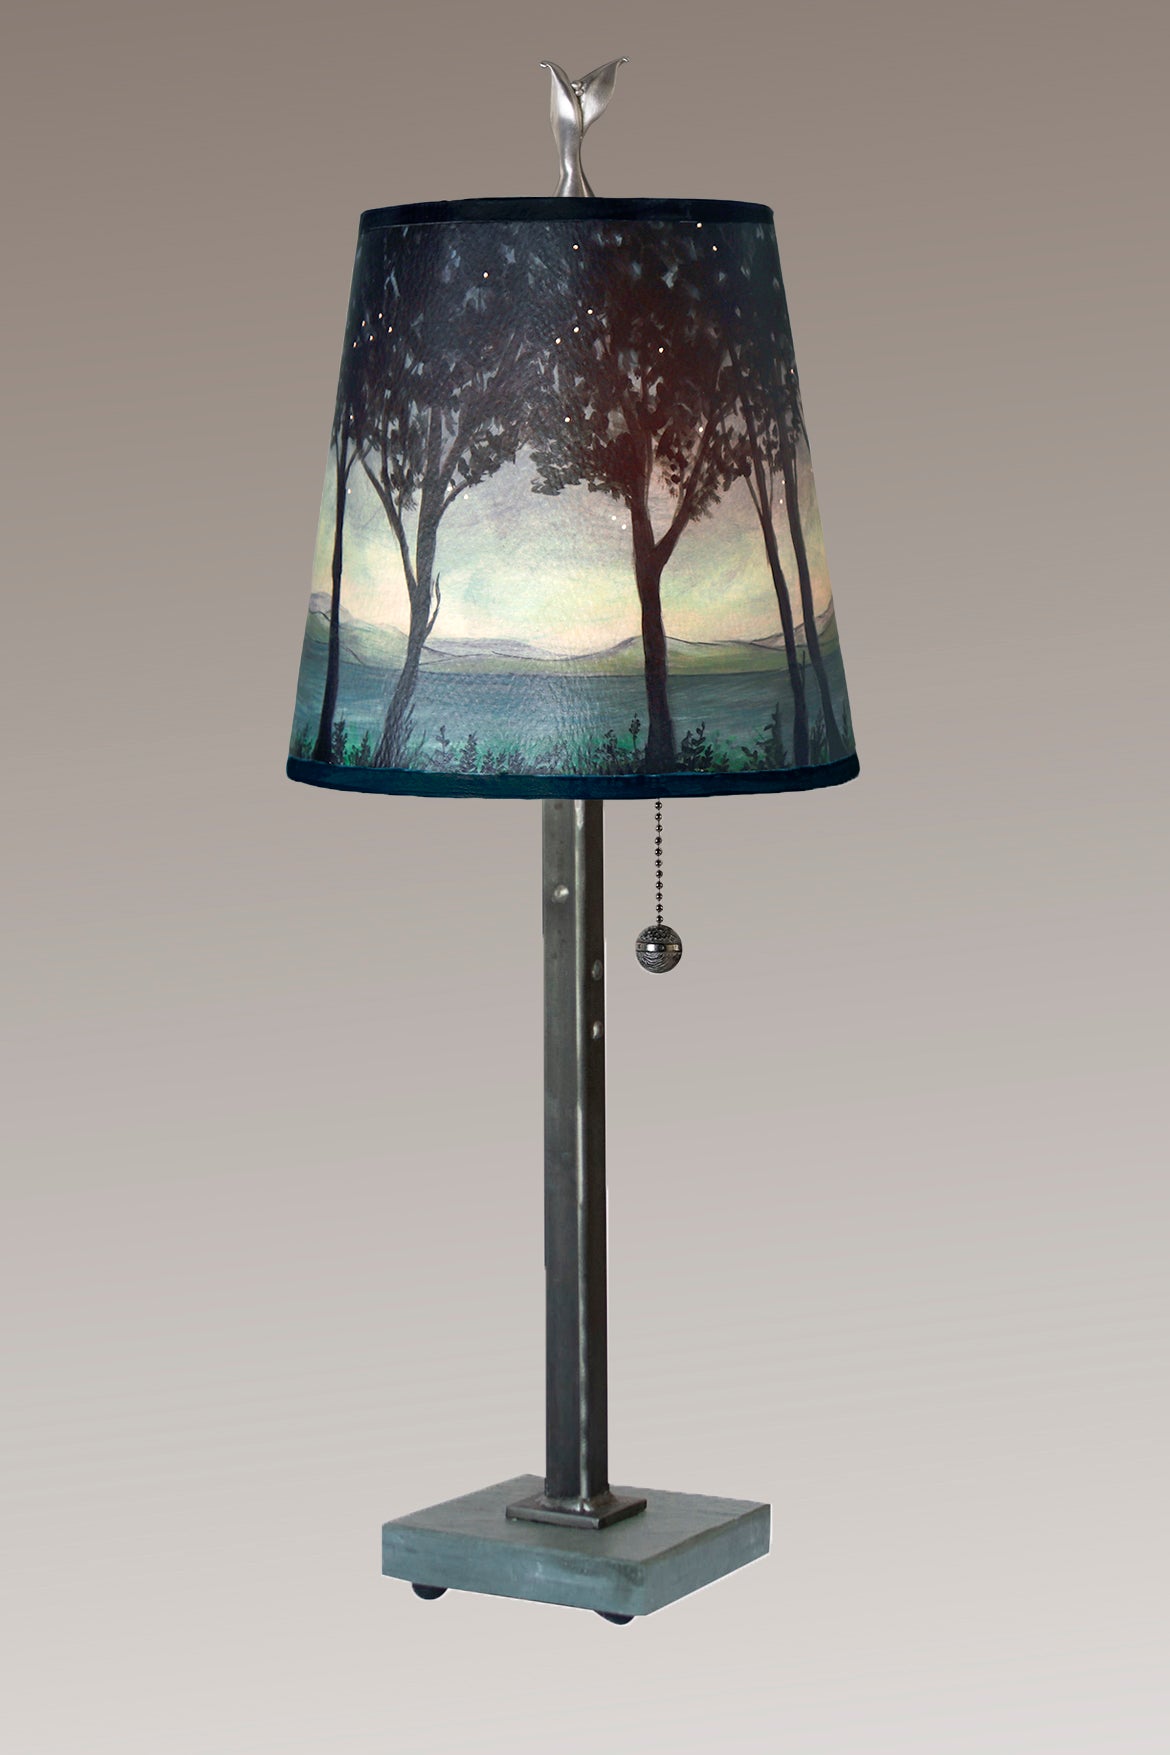 Janna Ugone & Co Table Lamps Steel Table Lamp with Small Drum Shade in Twilight